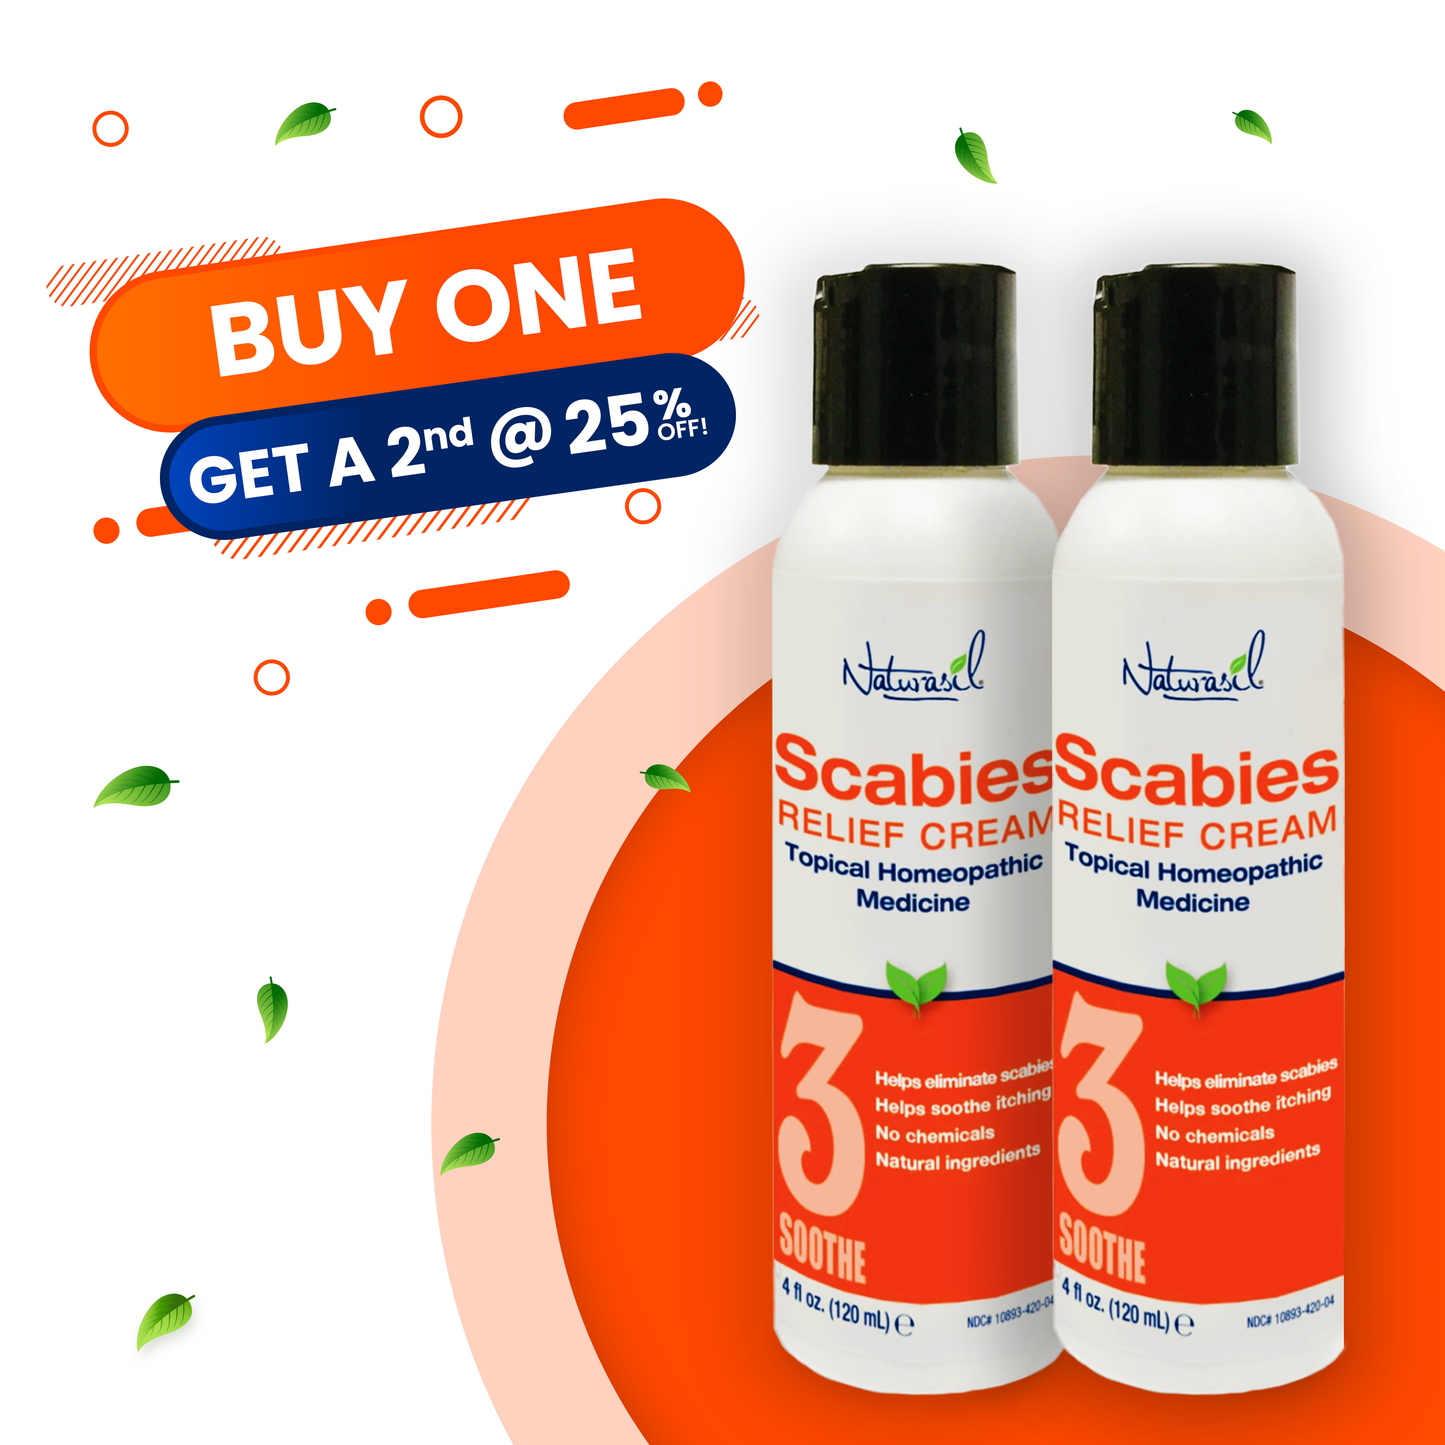 Scabies Treatment Cream | Buy One, Get a 2nd @ 25% Off | 2 - 4 oz Bottles